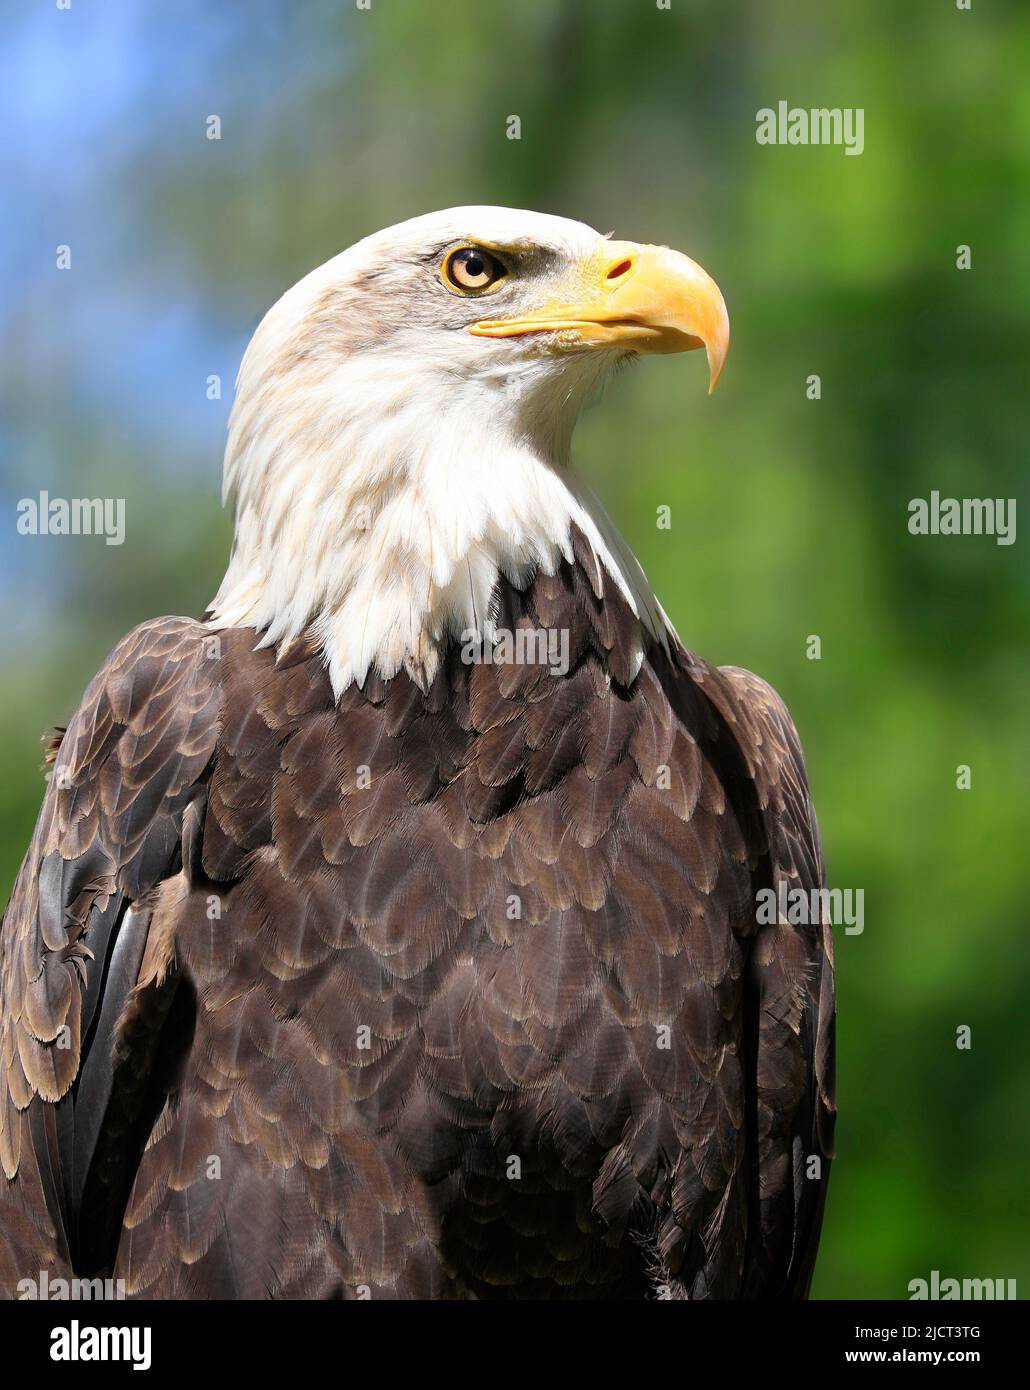 Bald eagle portrait with green background, Canada Stock Photo